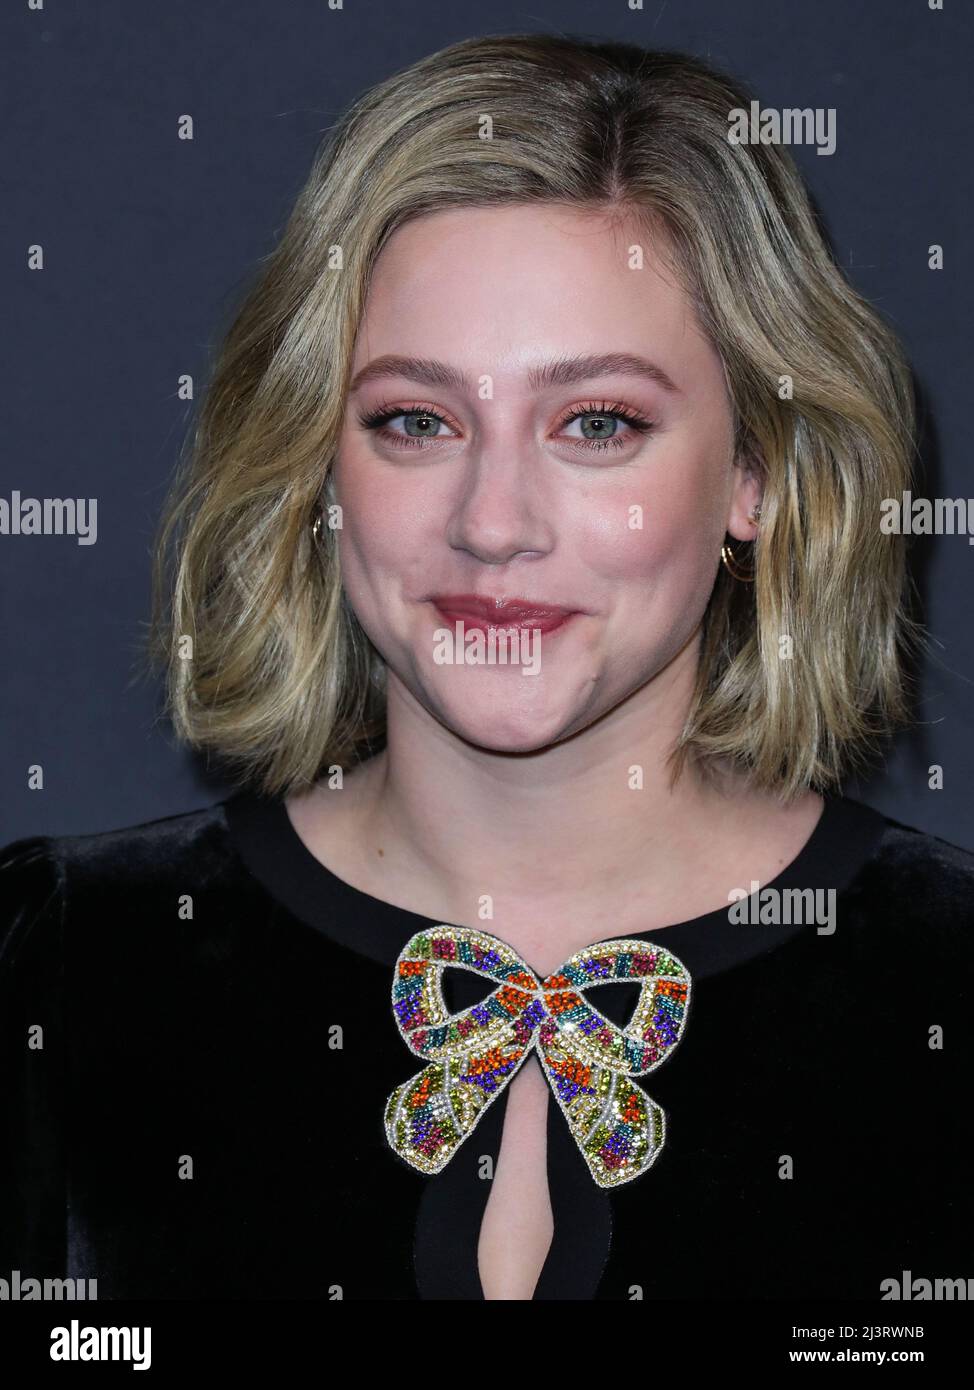 HOLLYWOOD, LOS ANGELES, CALIFORNIA, USA - APRIL 09: American actress Lili Reinhart arrives at the 2022 PaleyFest LA - The CW's 'Riverdale' held at the Dolby Theatre on April 9, 2022 in Hollywood, Los Angeles, California, United States. (Photo by Xavier Collin/Image Press Agency/Sipa USA) Stock Photo